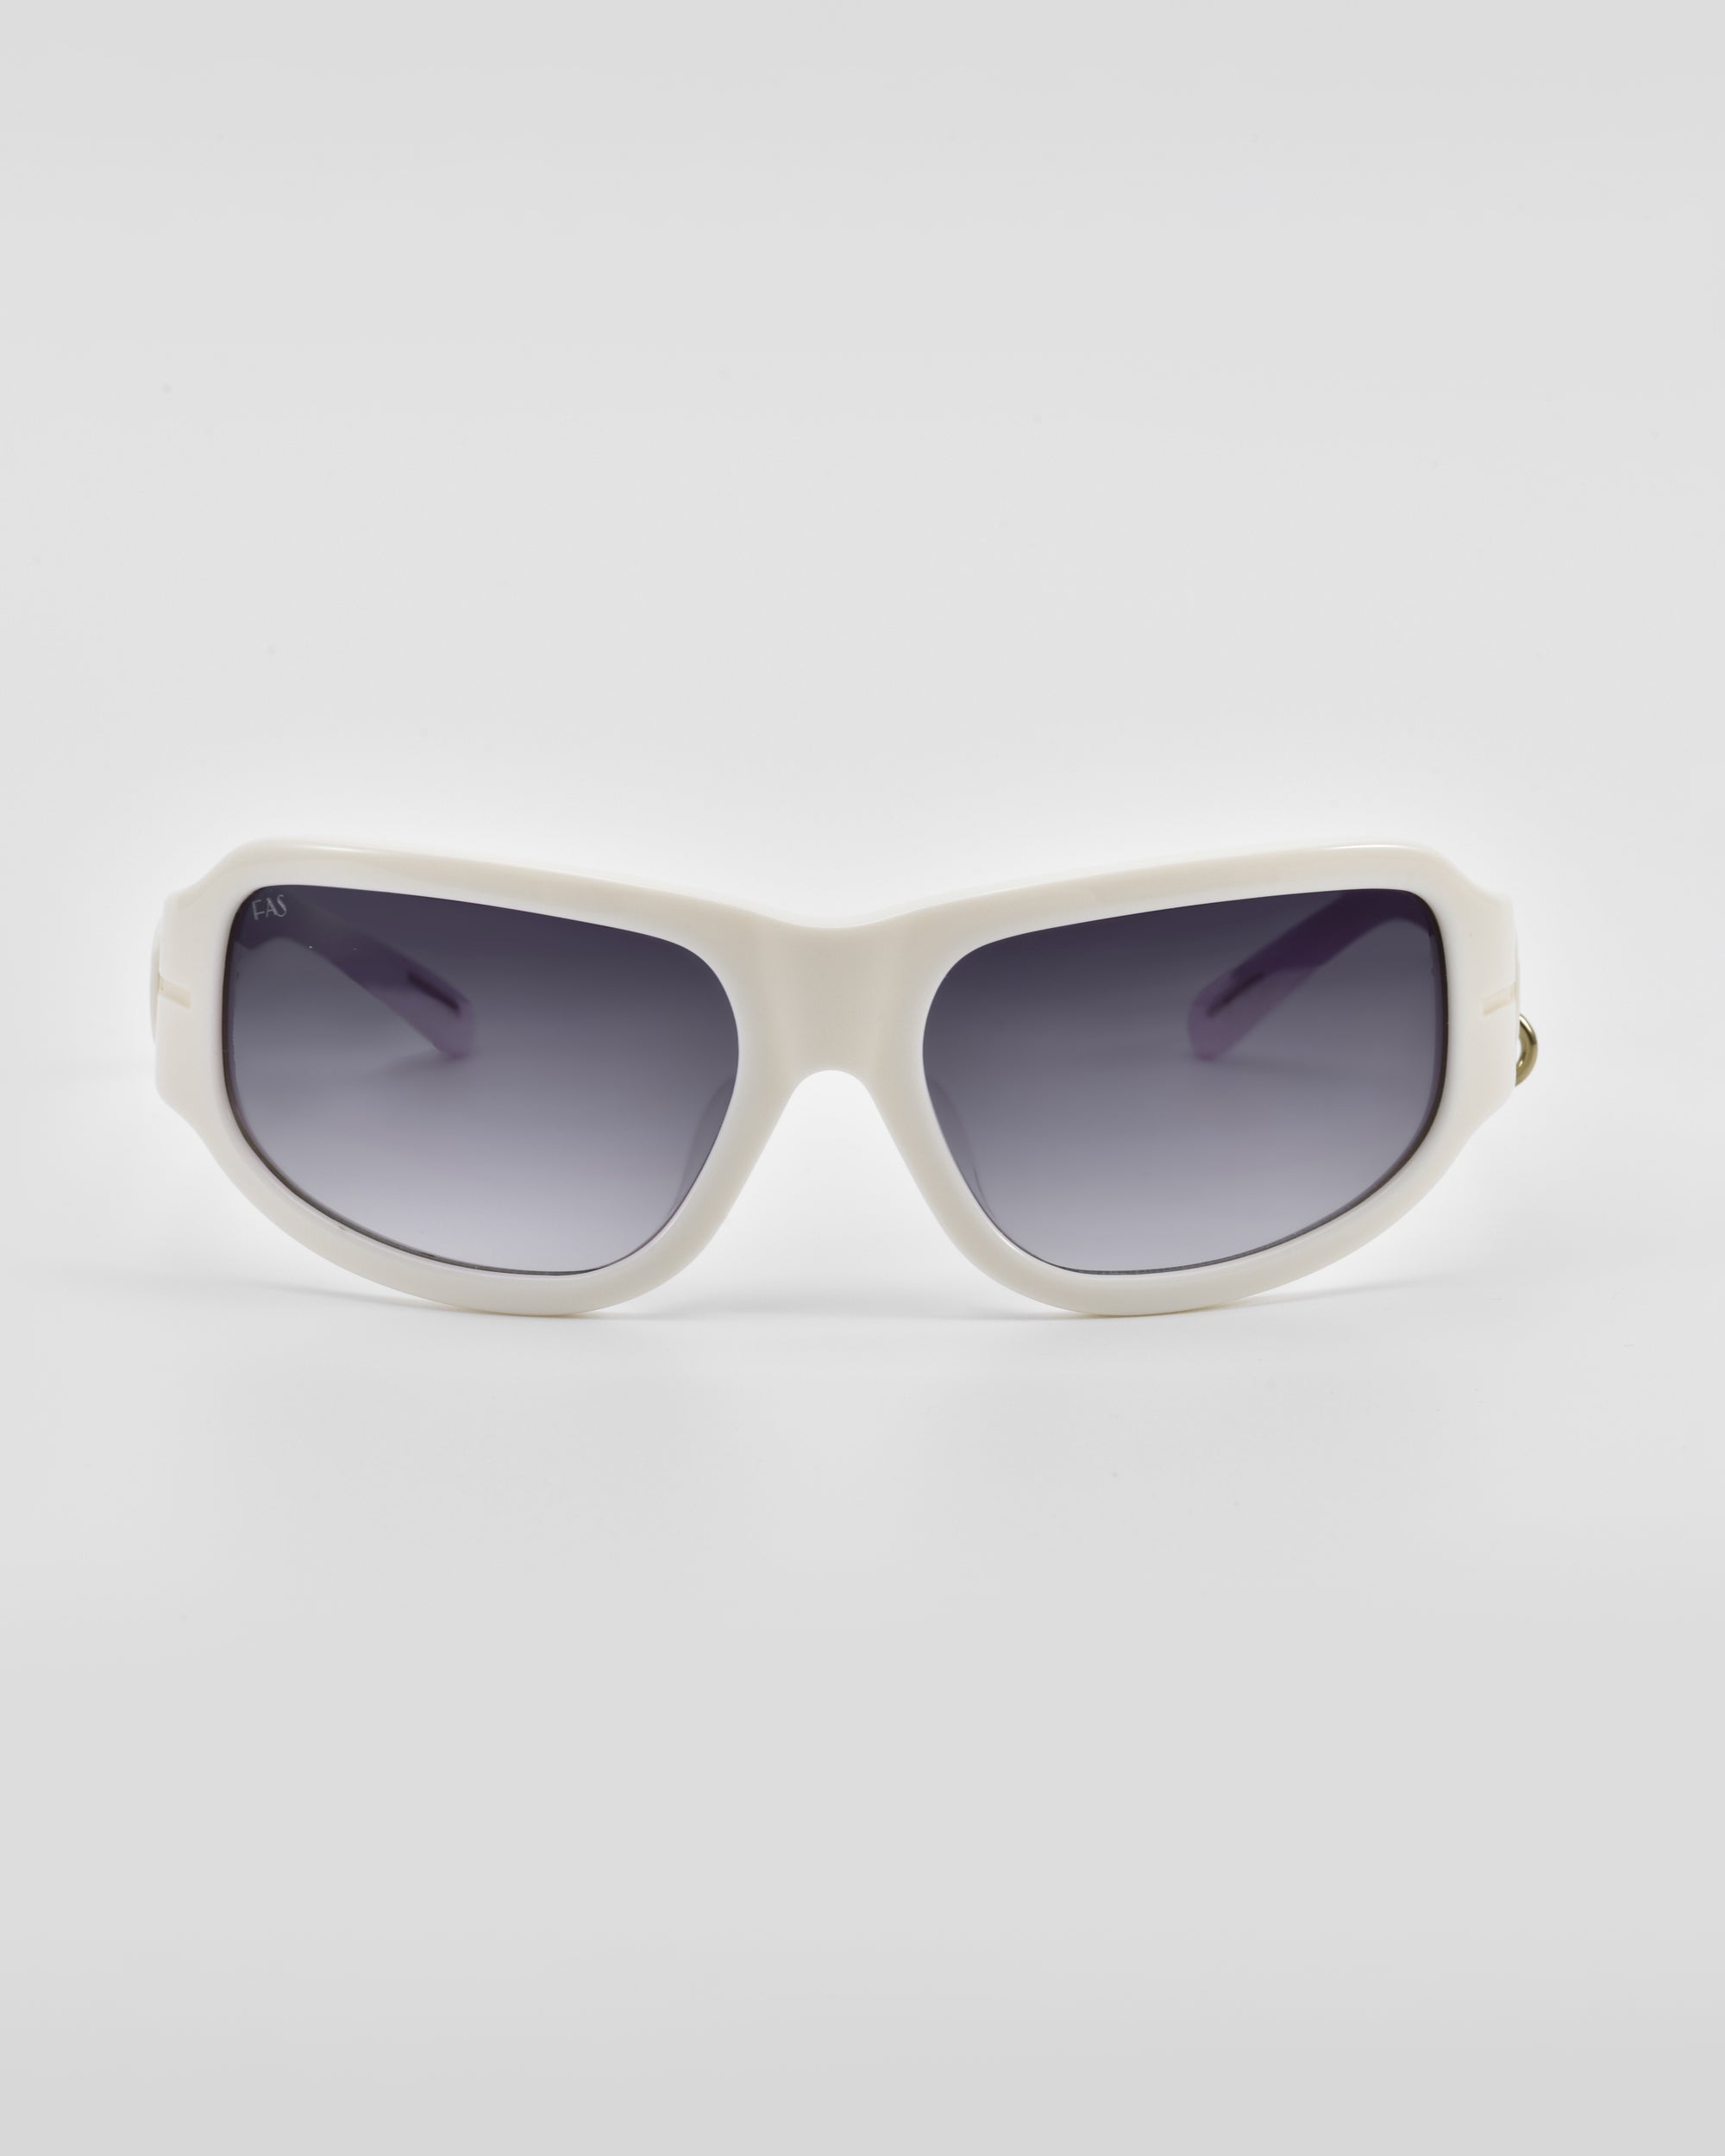 A pair of white-framed For Art's Sake® Raven sunglasses with dark, gradient lenses is displayed against a plain, light gray background. The sunglasses have a sleek, modern design with a slightly curved temple.